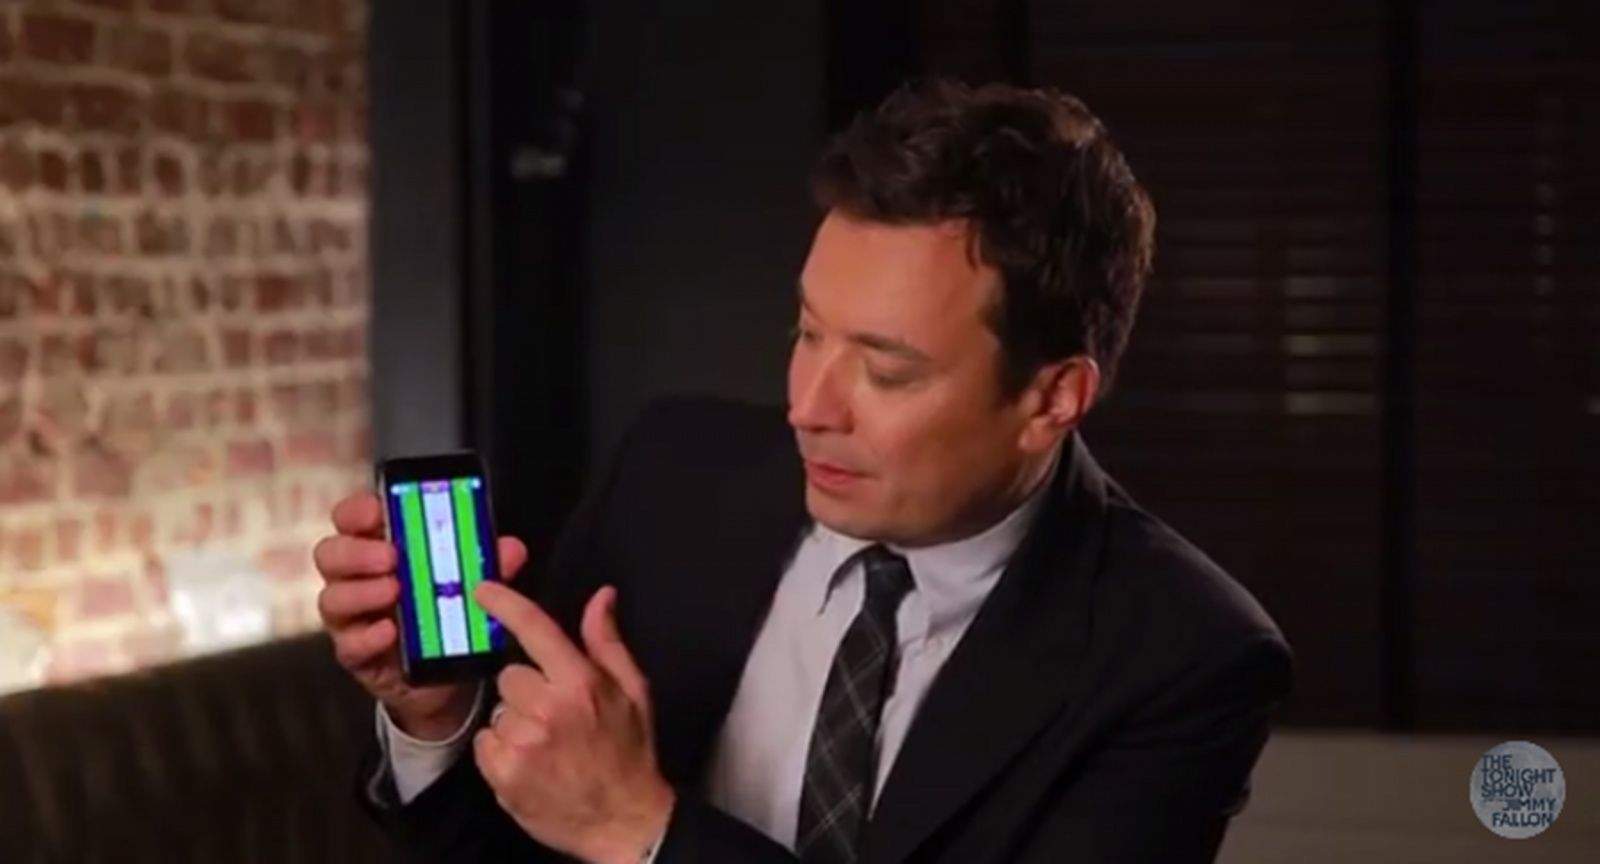 Jimmy Fallon brings fun and feathers to his game Tedzy, which launched on iTunes Thursday. Photo: Sparklehorse/YouTube